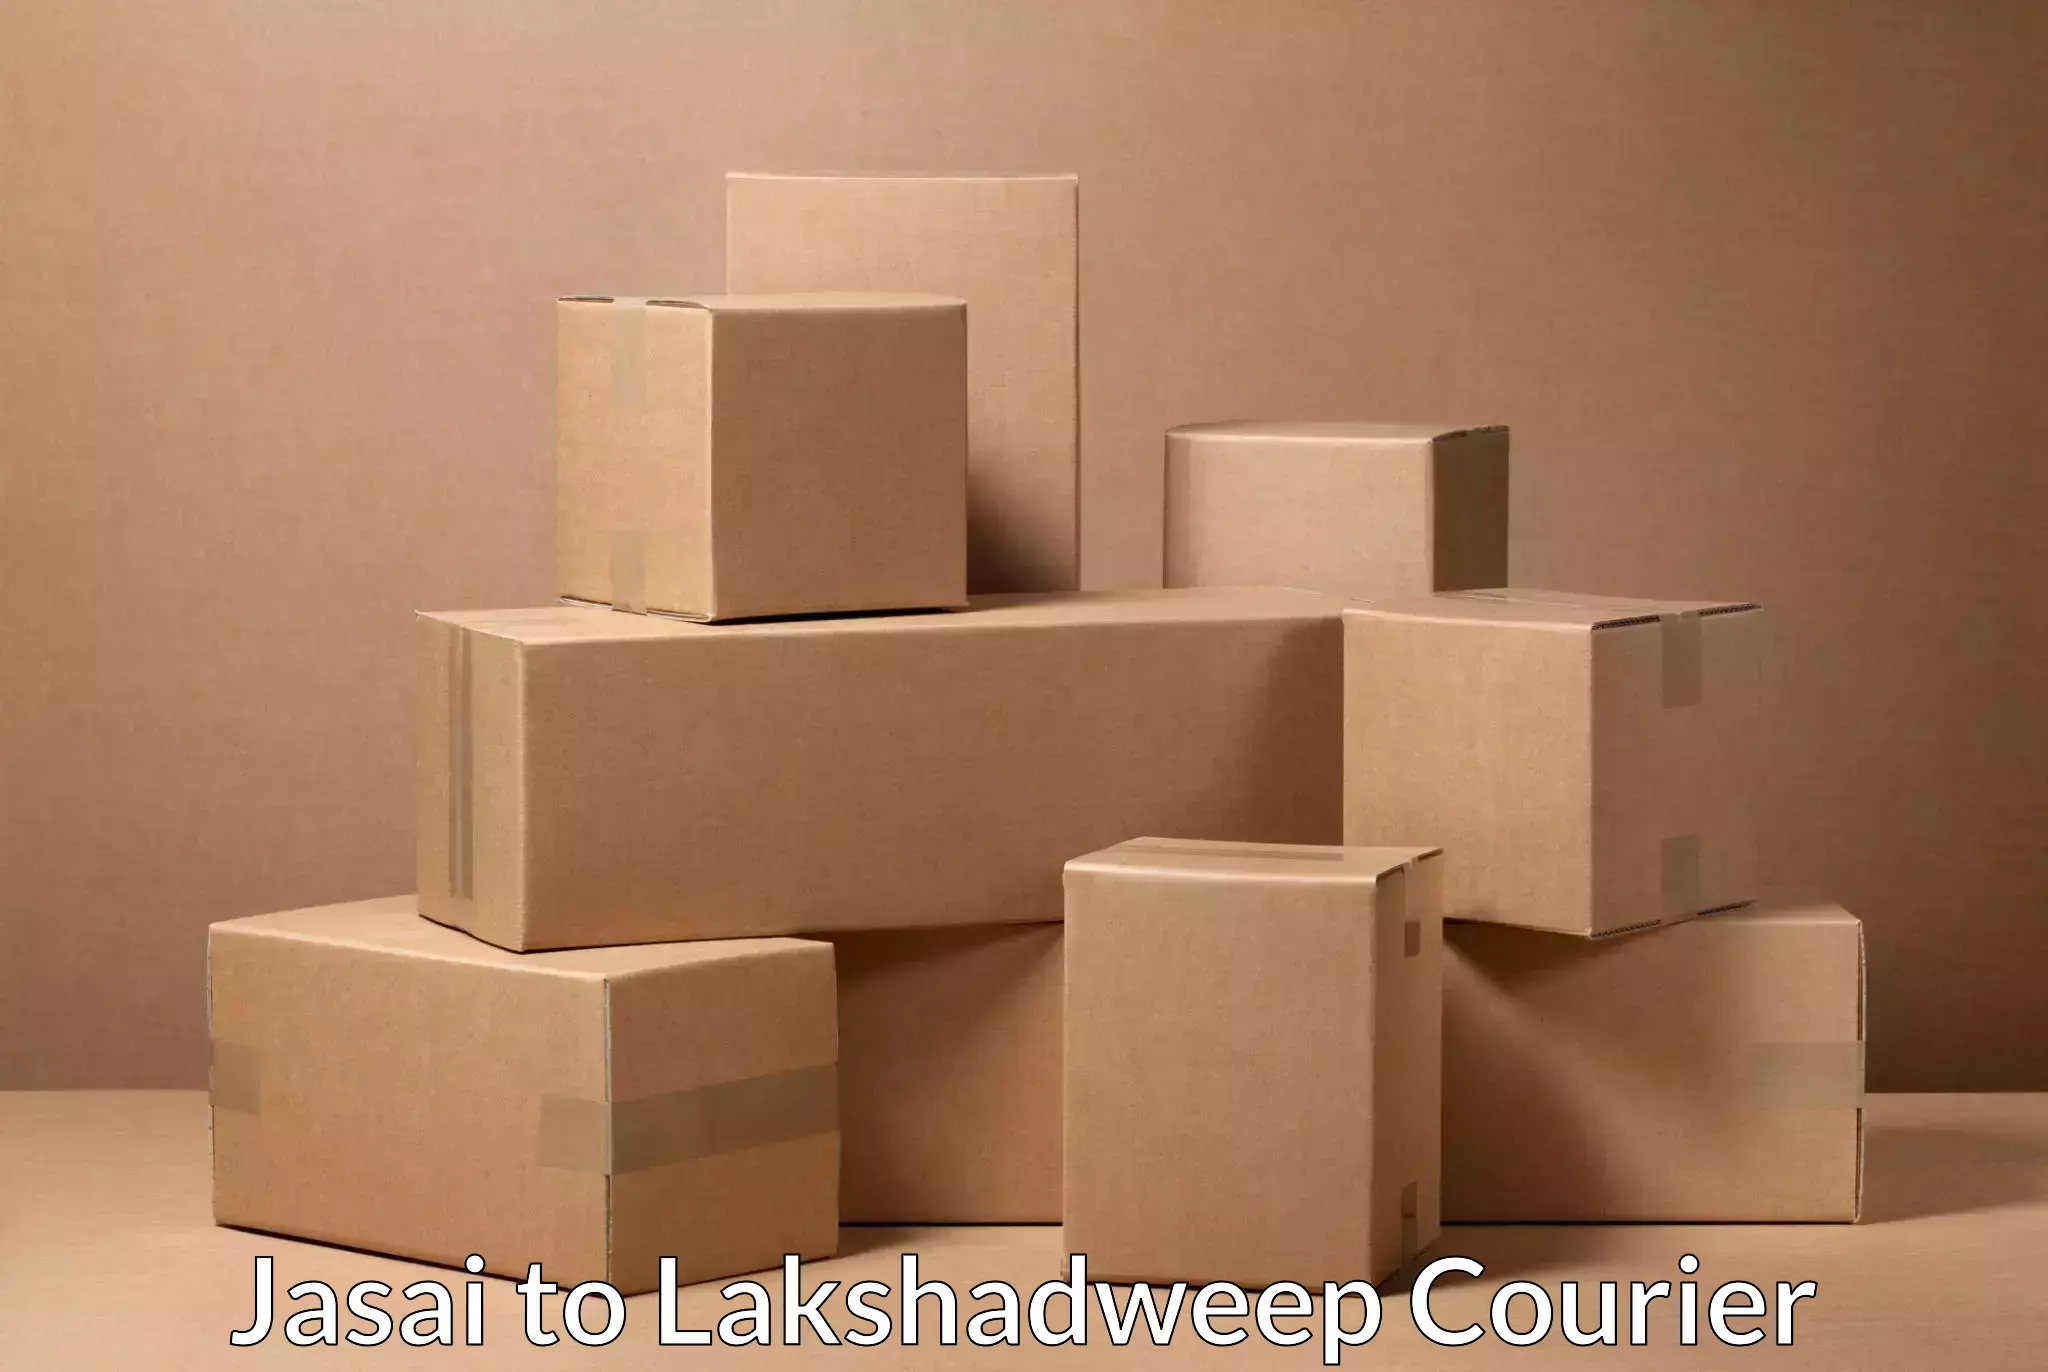 Professional courier services Jasai to Lakshadweep